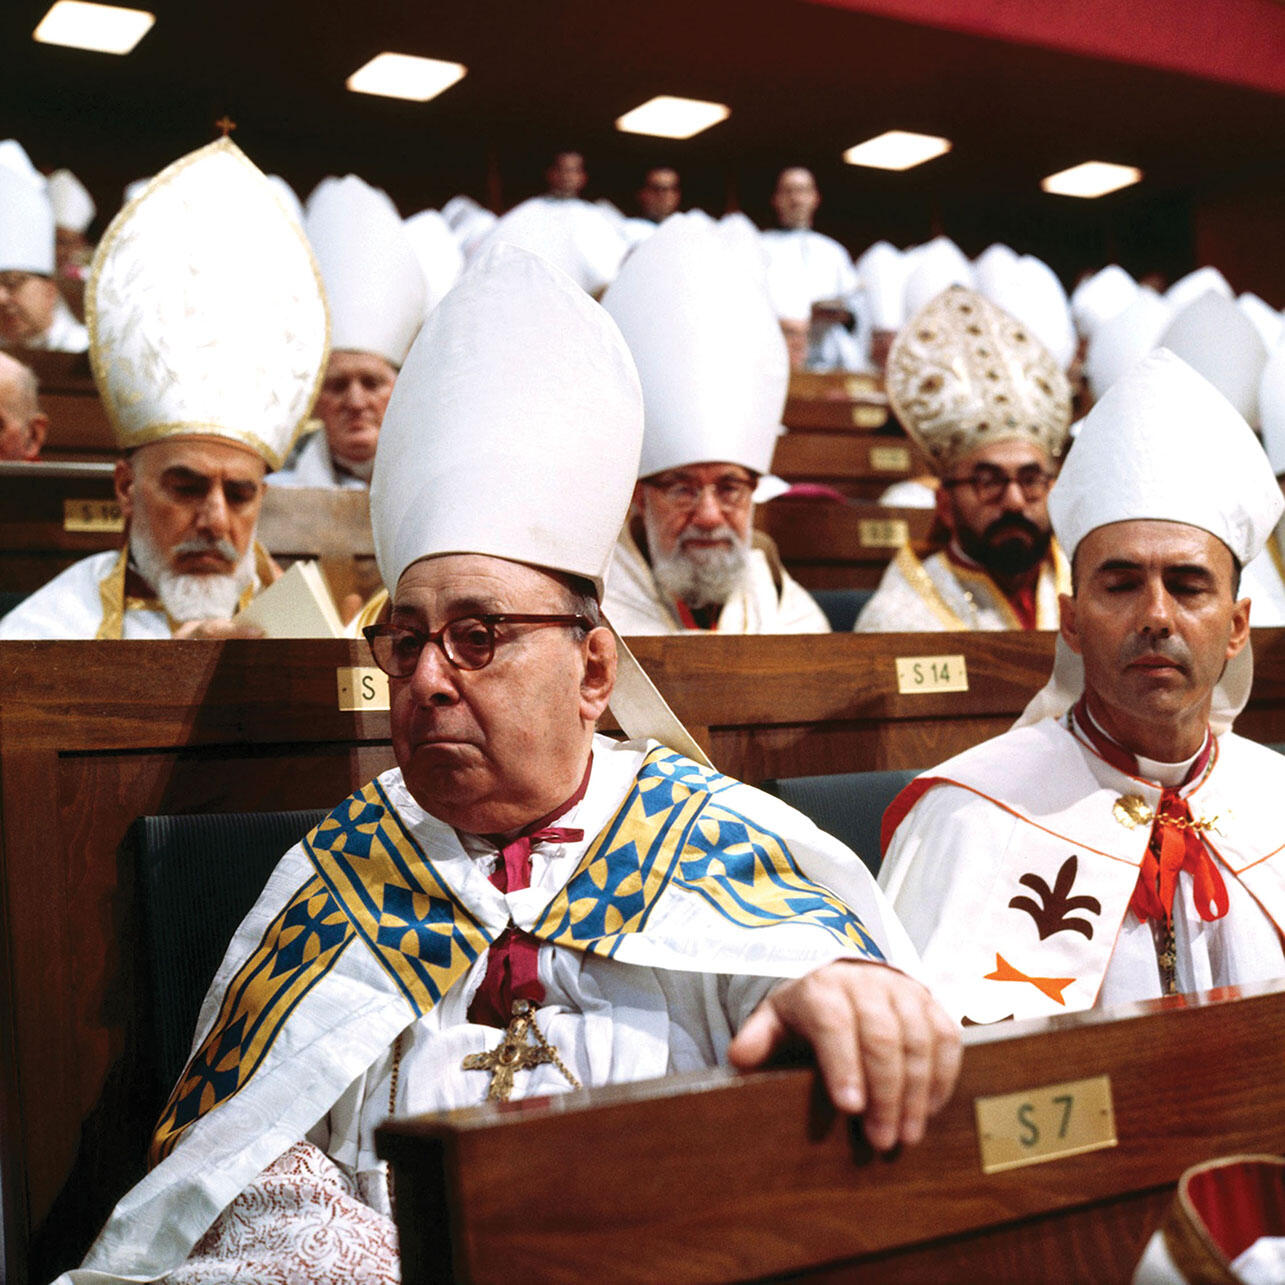 Roman Catholic cardinals in pews at the Second Vatican Council (Vatican II) in 1962. (Photo by Lothar Wolleh/Wikimedia Commons.)